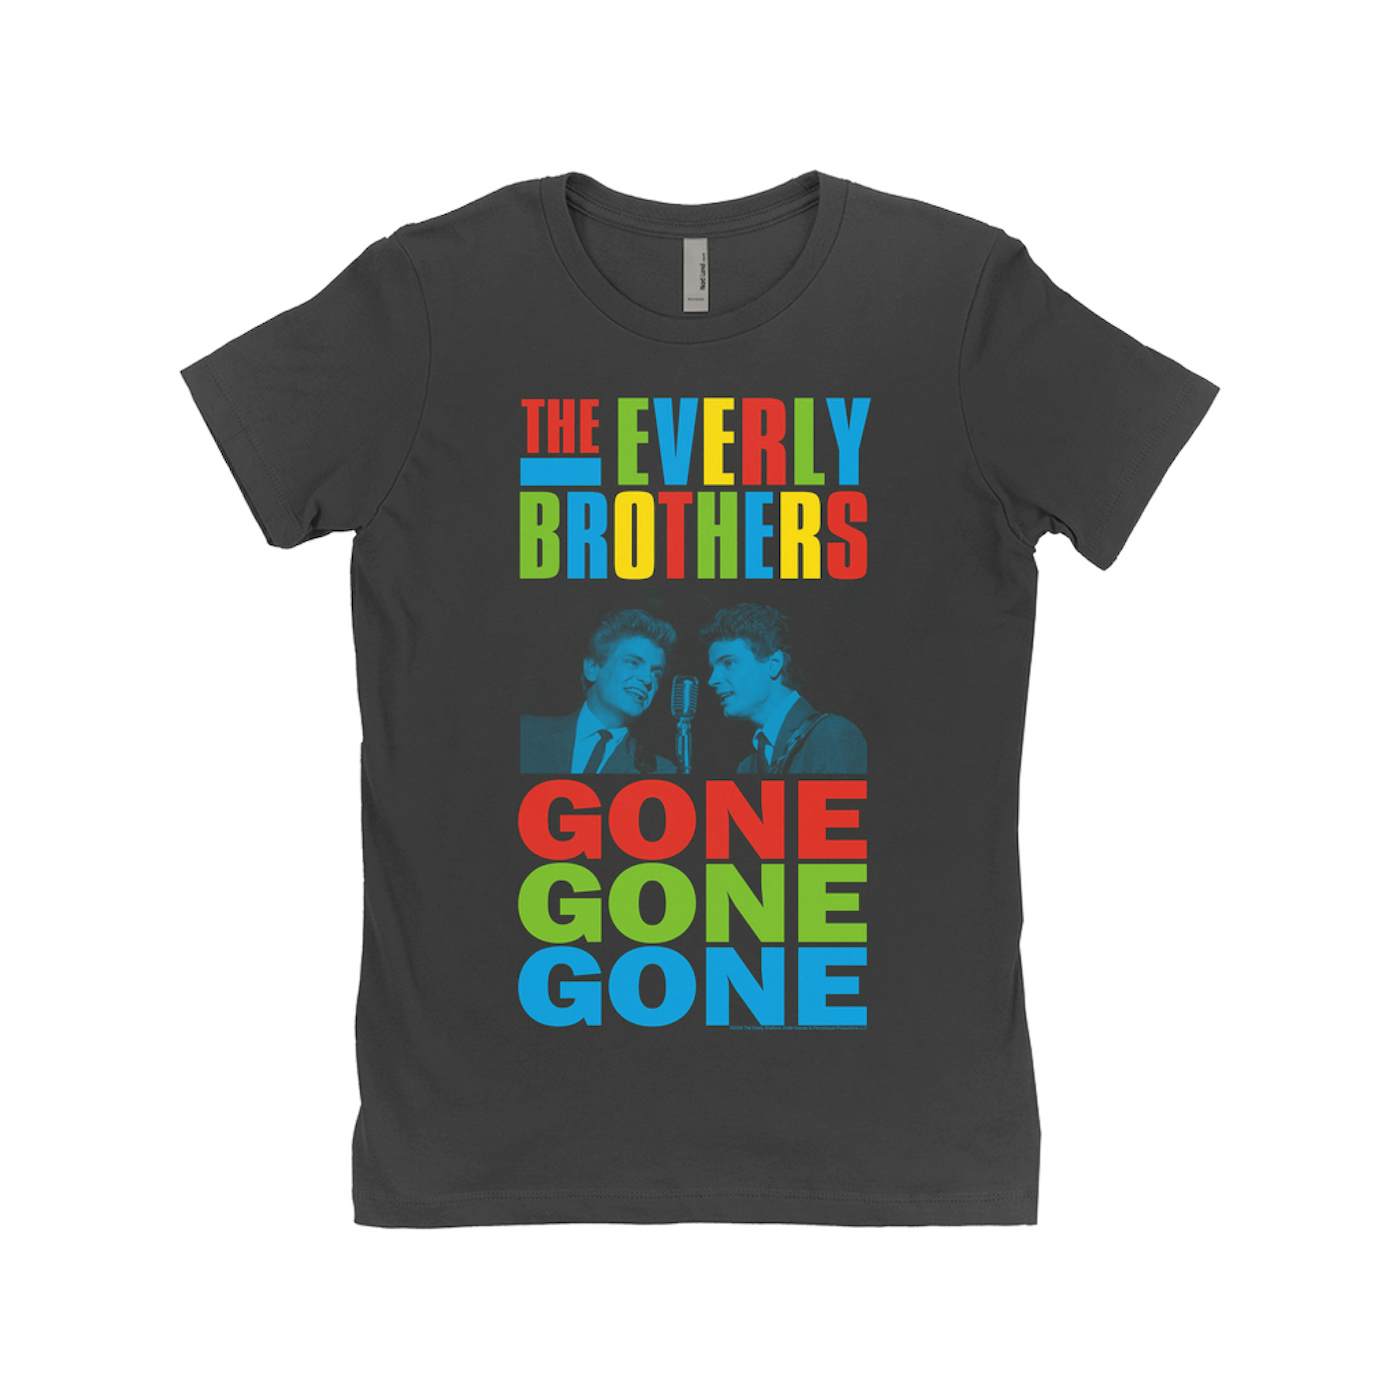 The Everly Brothers Ladies' Boyfriend T-Shirt | Gone, Gone, Gone Colorful The Everly Brothers Shirt